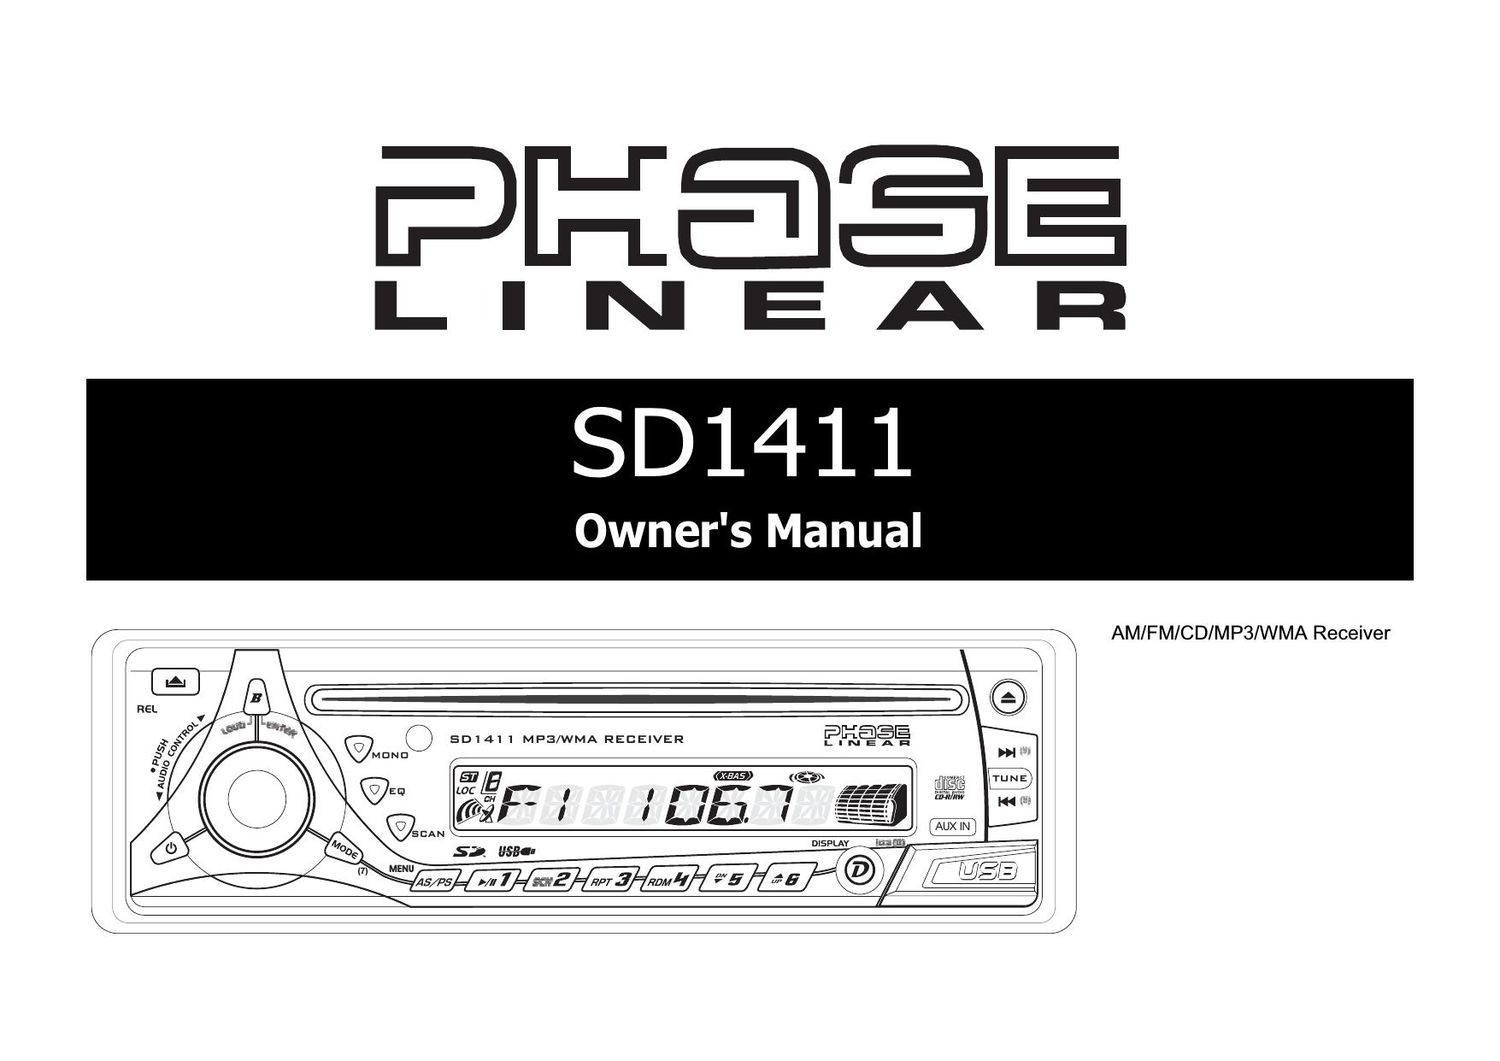 Phase Linear SD 1411 Owners Manual